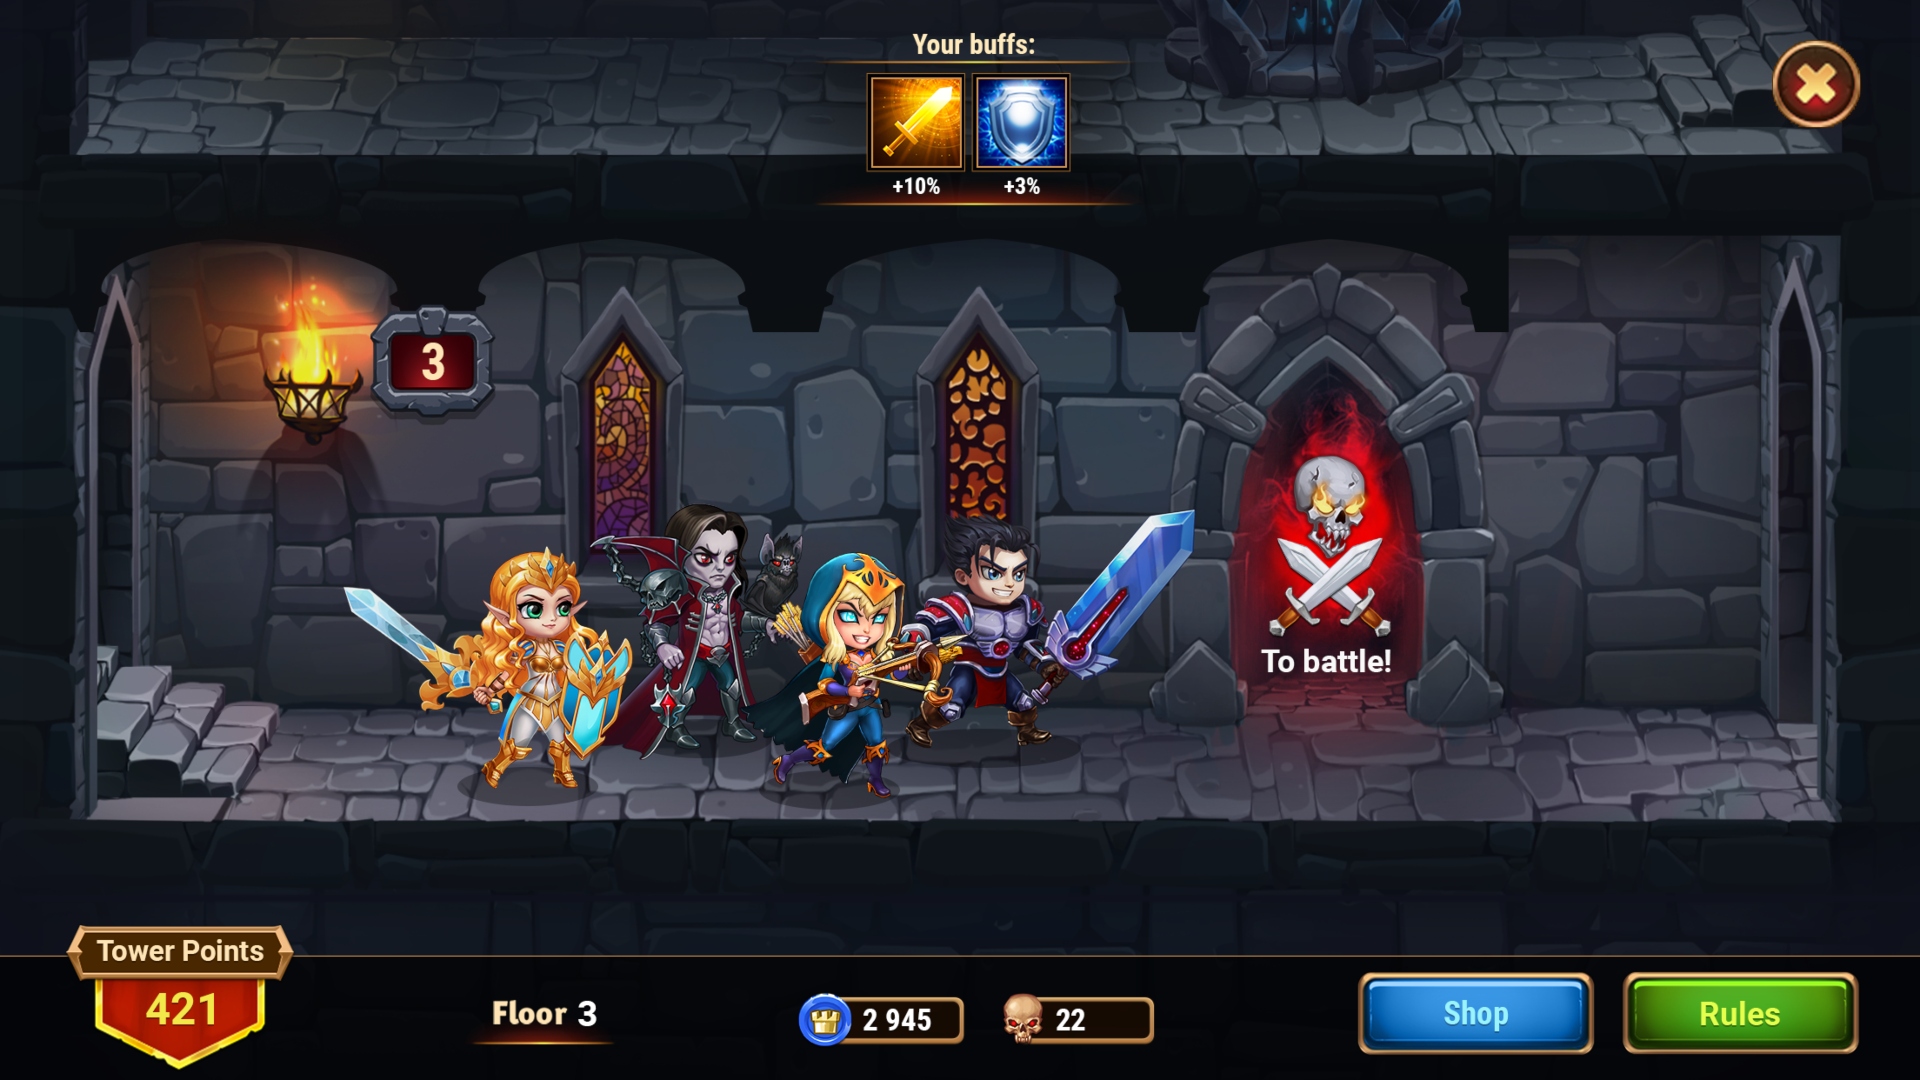 The Best Idle Clicker Games 